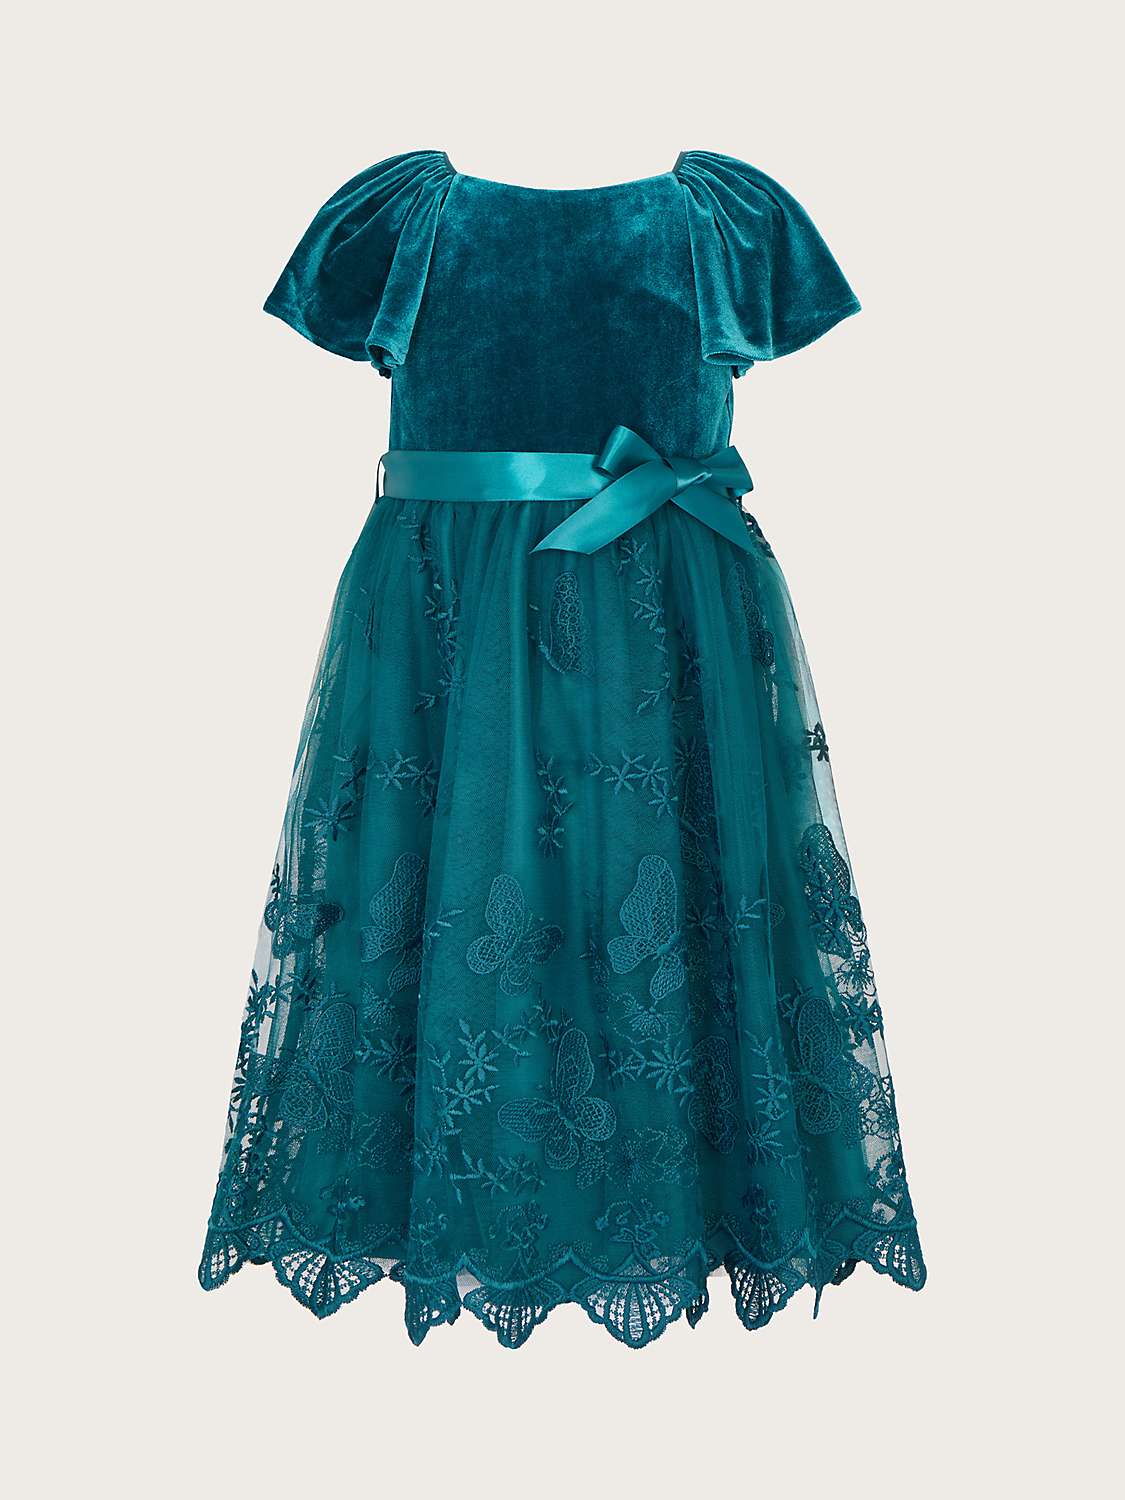 Buy Monsoon Kids' May Velvet & Lace Butterfly Occasion Dress, Teal Online at johnlewis.com